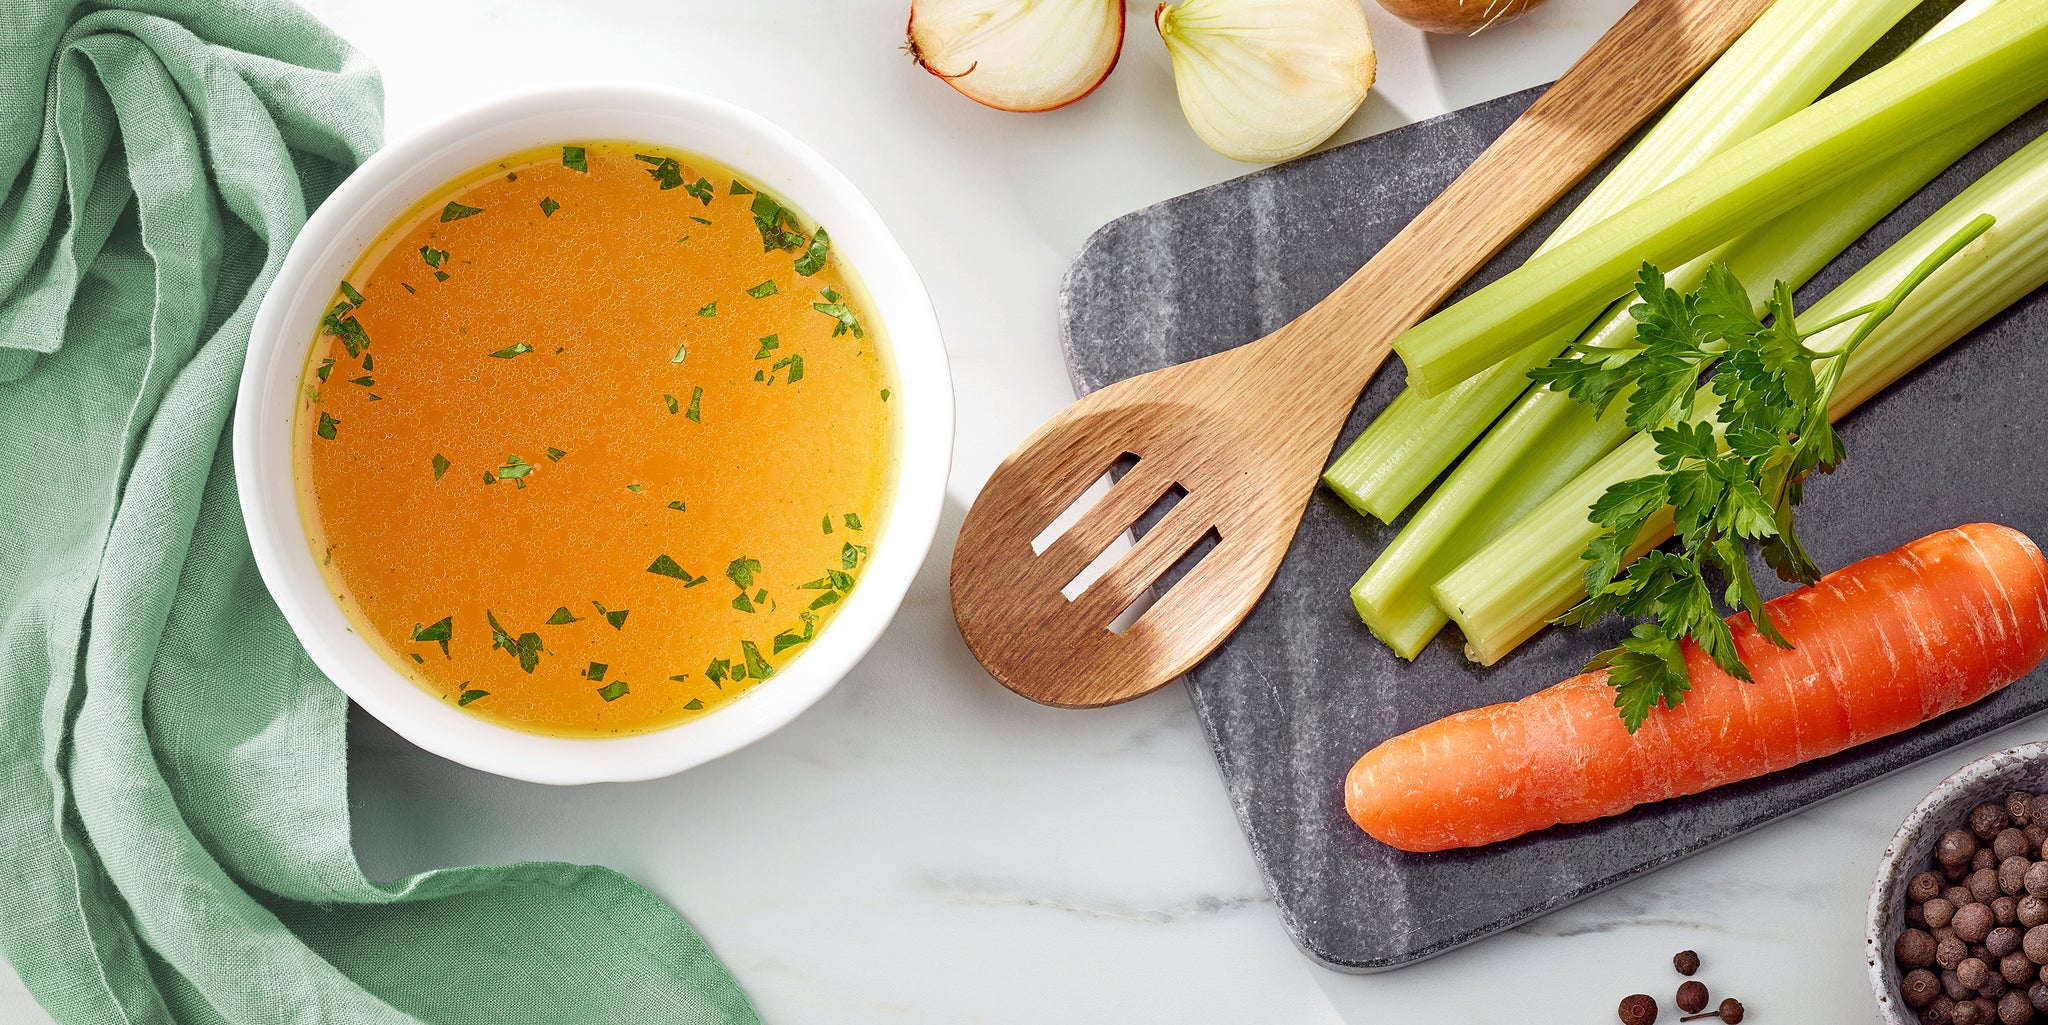 Best foods to eat when you're sick, including soup, celery, and carrots.